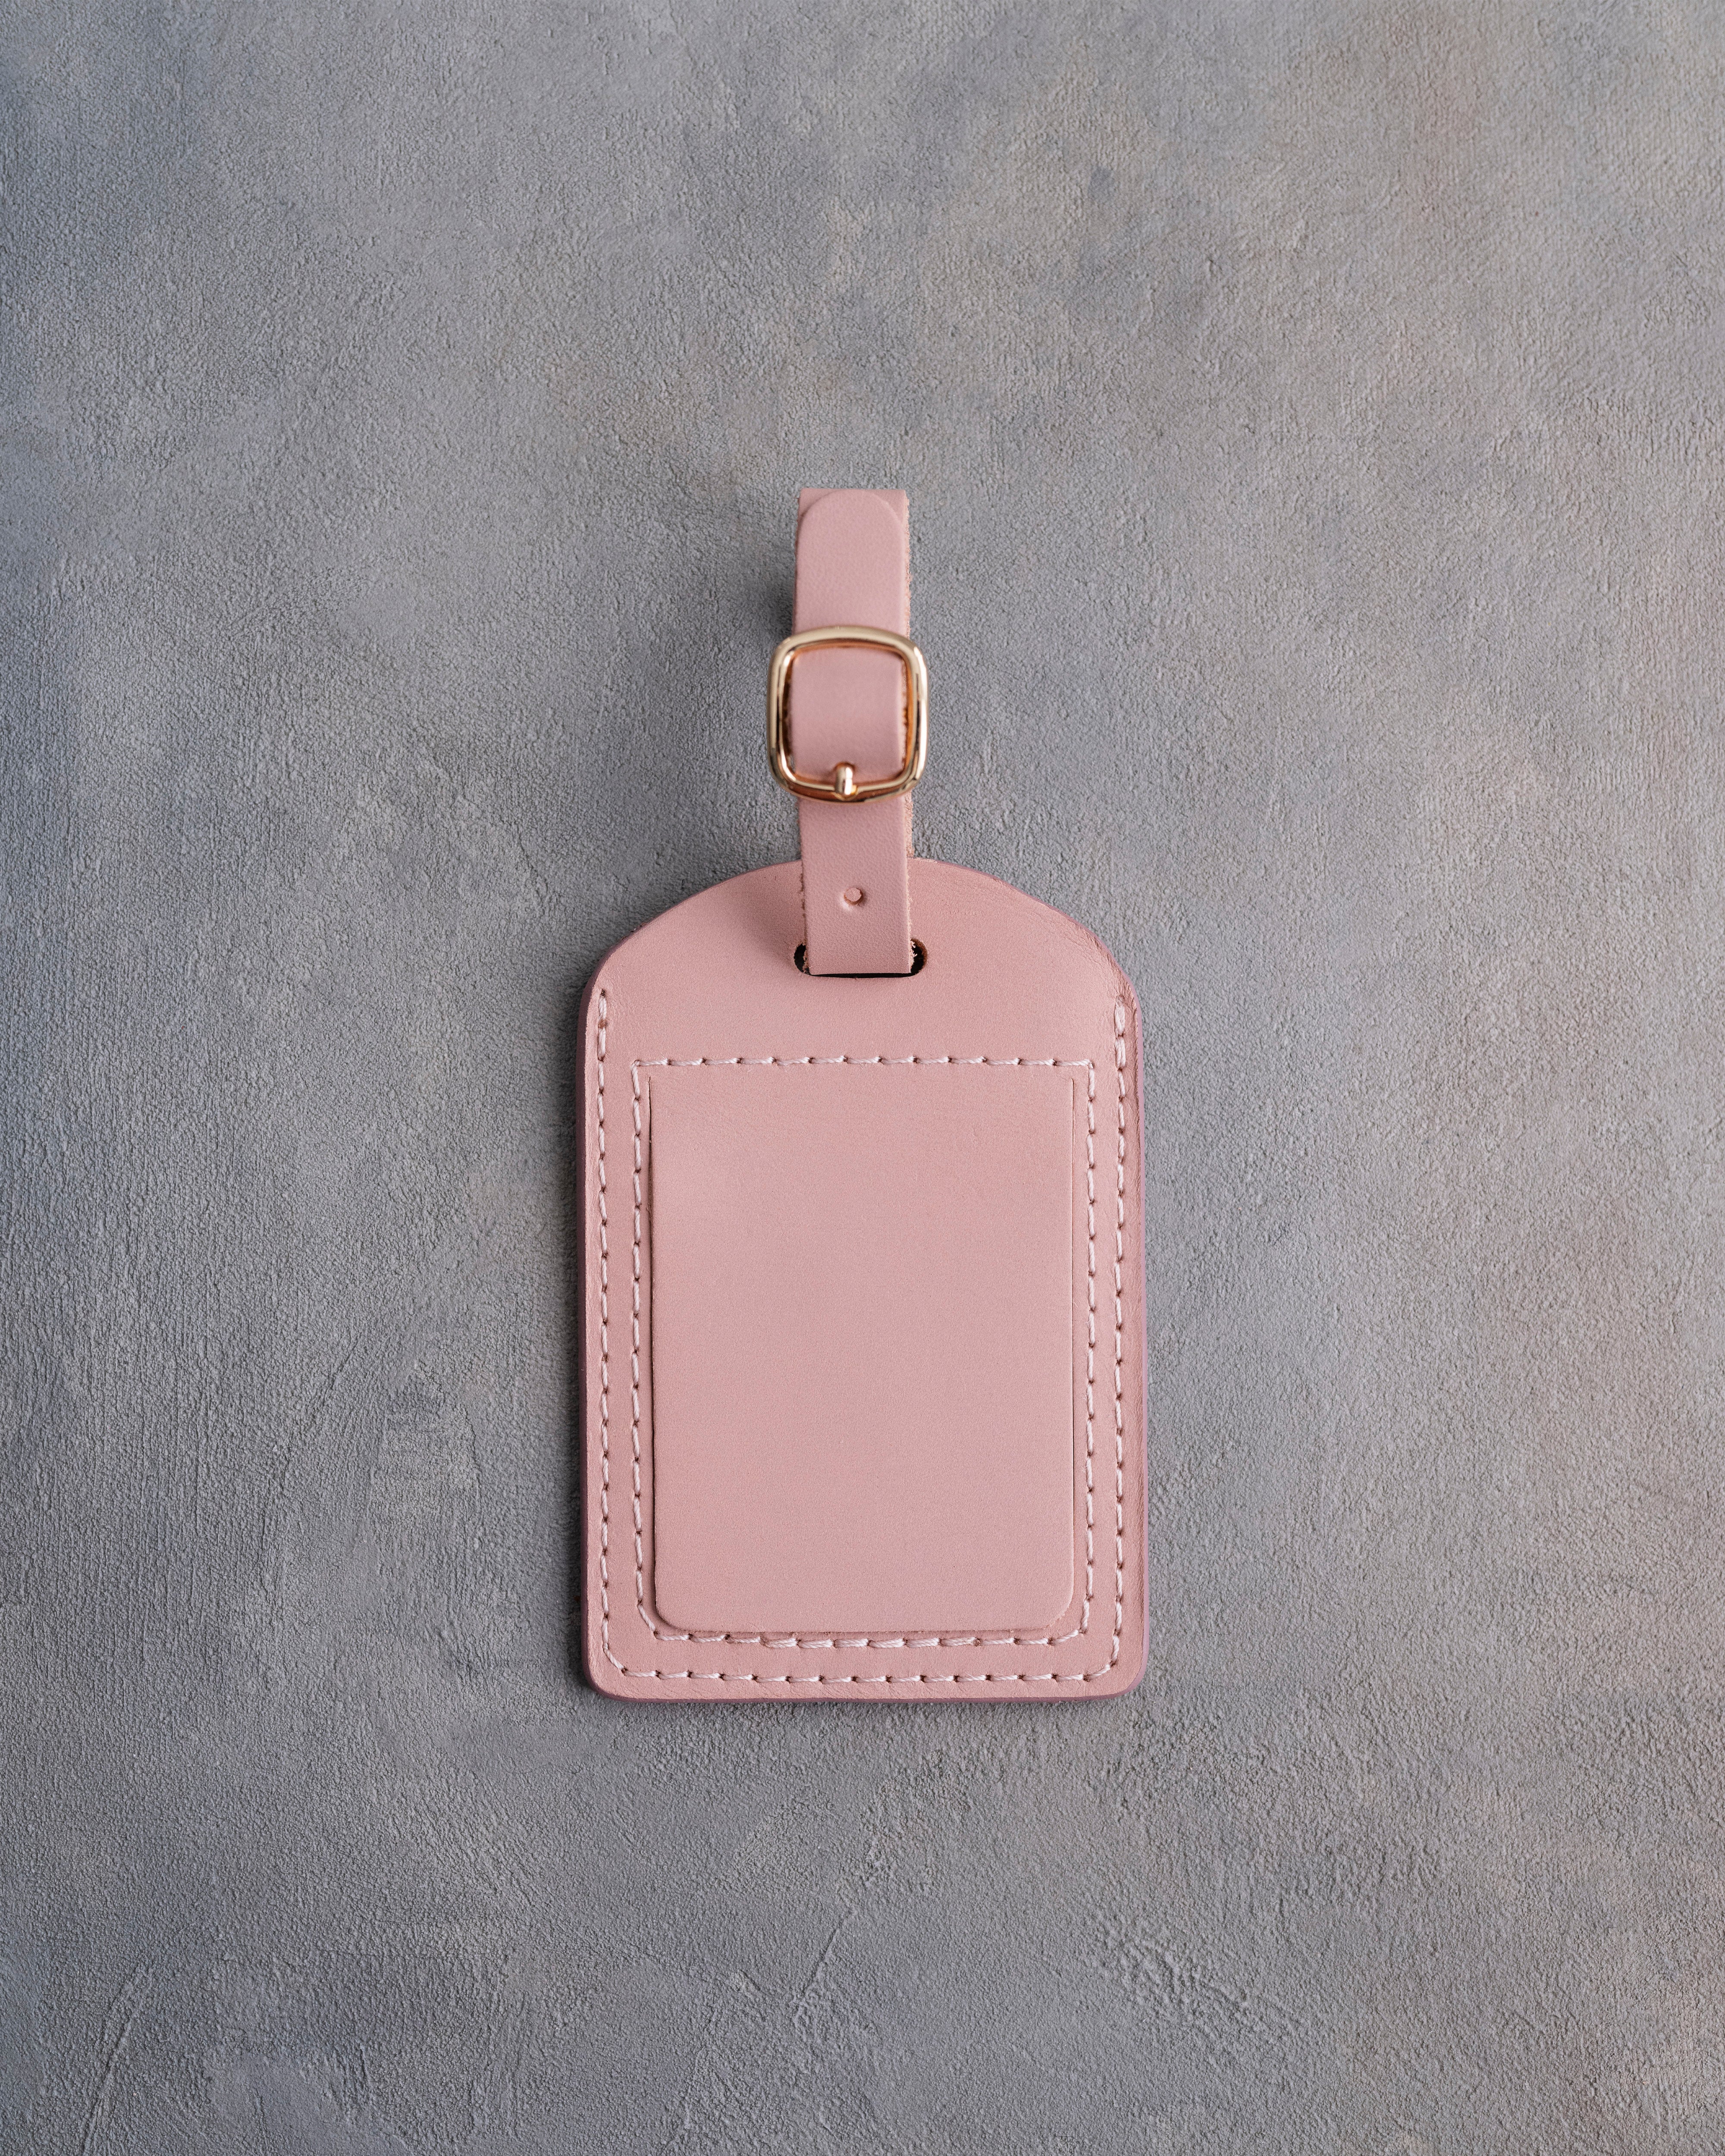 Floral Name Luggage Tag in Blush Leather